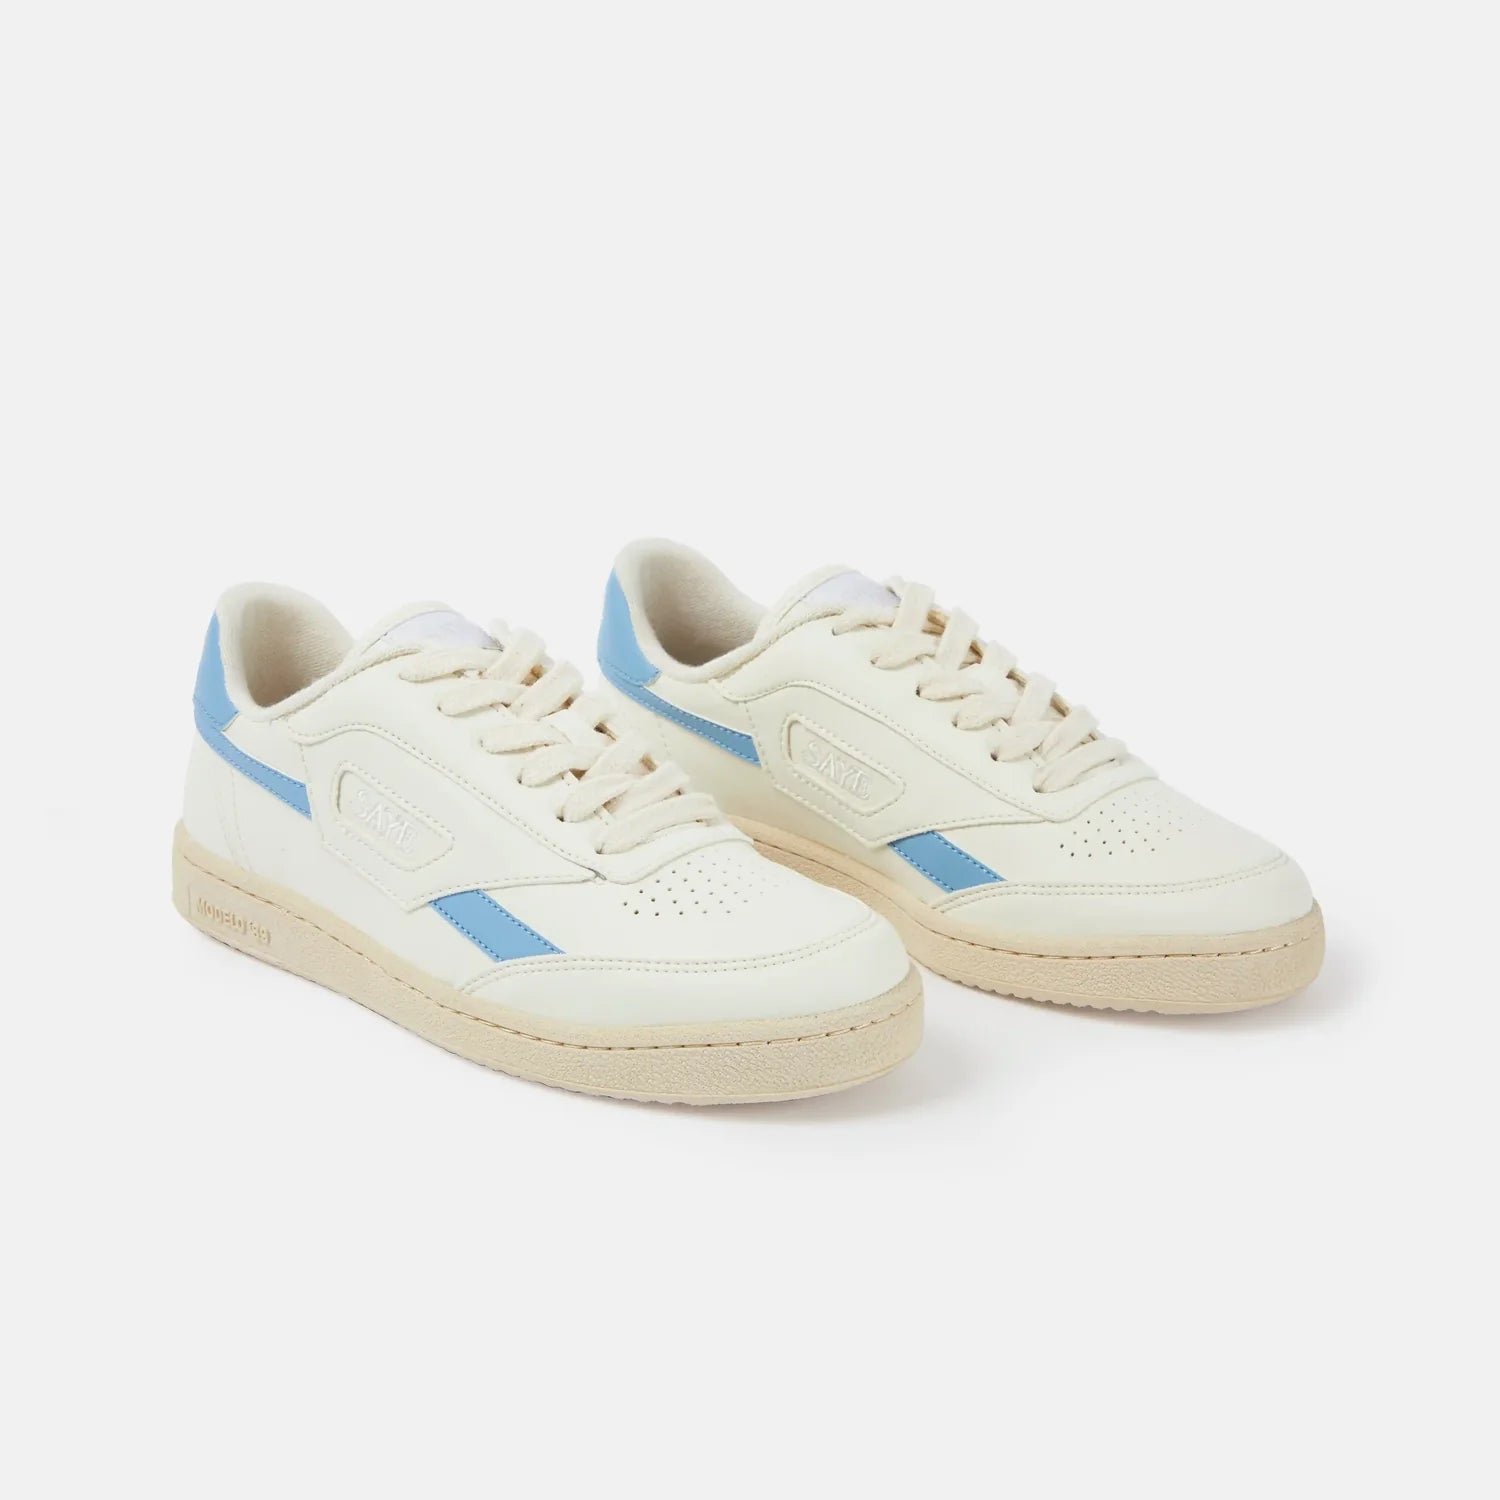 Off white sneakers with light blue side detail